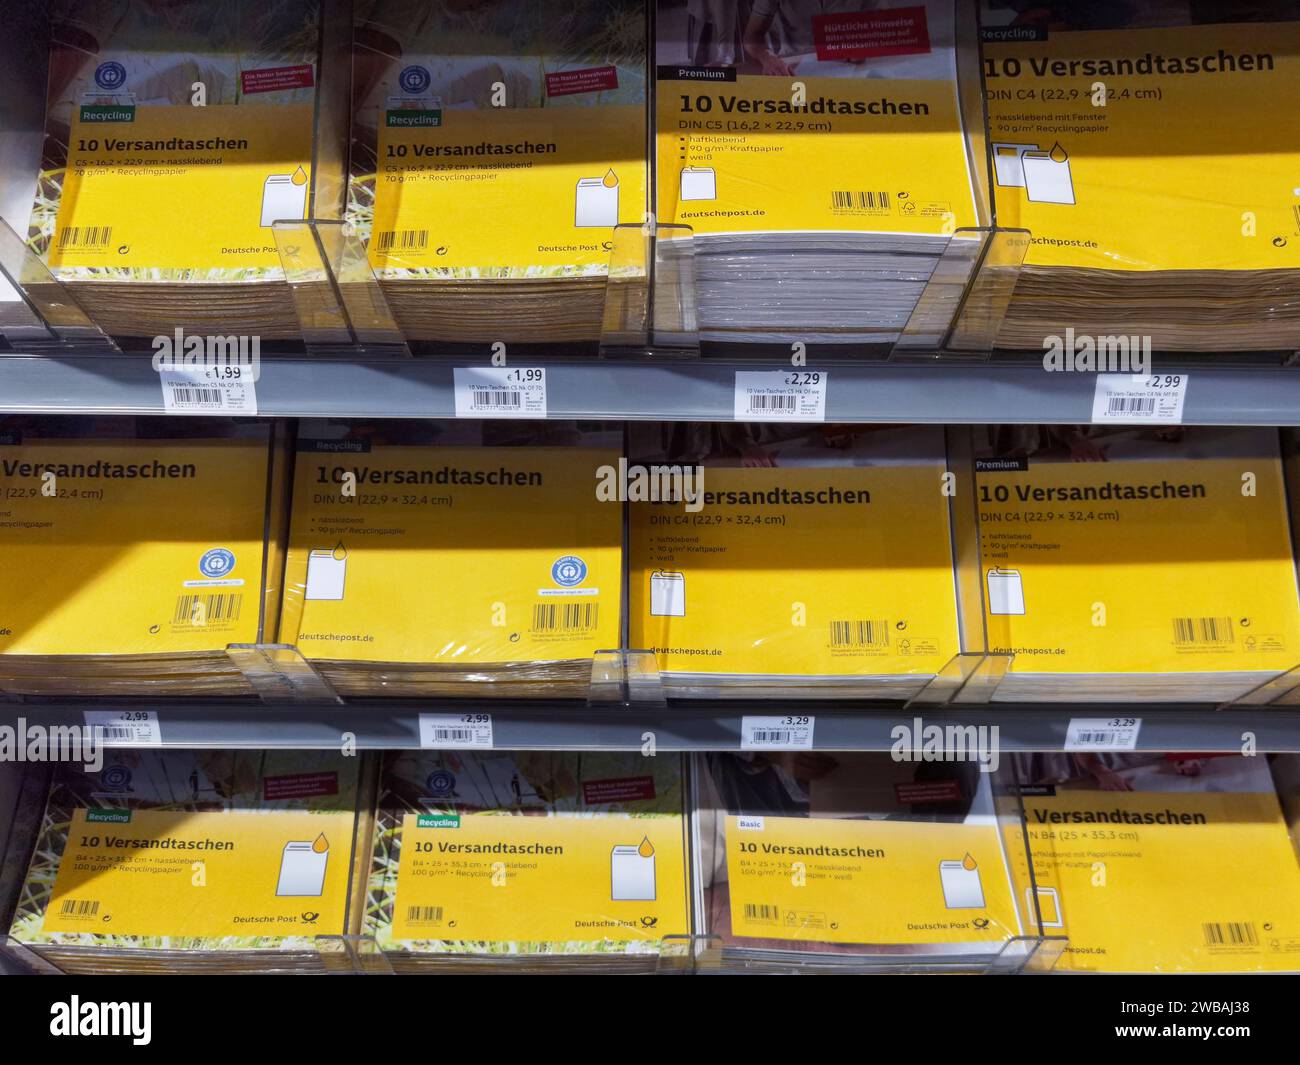 Berlin, Germany - February 2, 2023: Shelf with various envelopes from Deutsche Post AG. Stock Photo